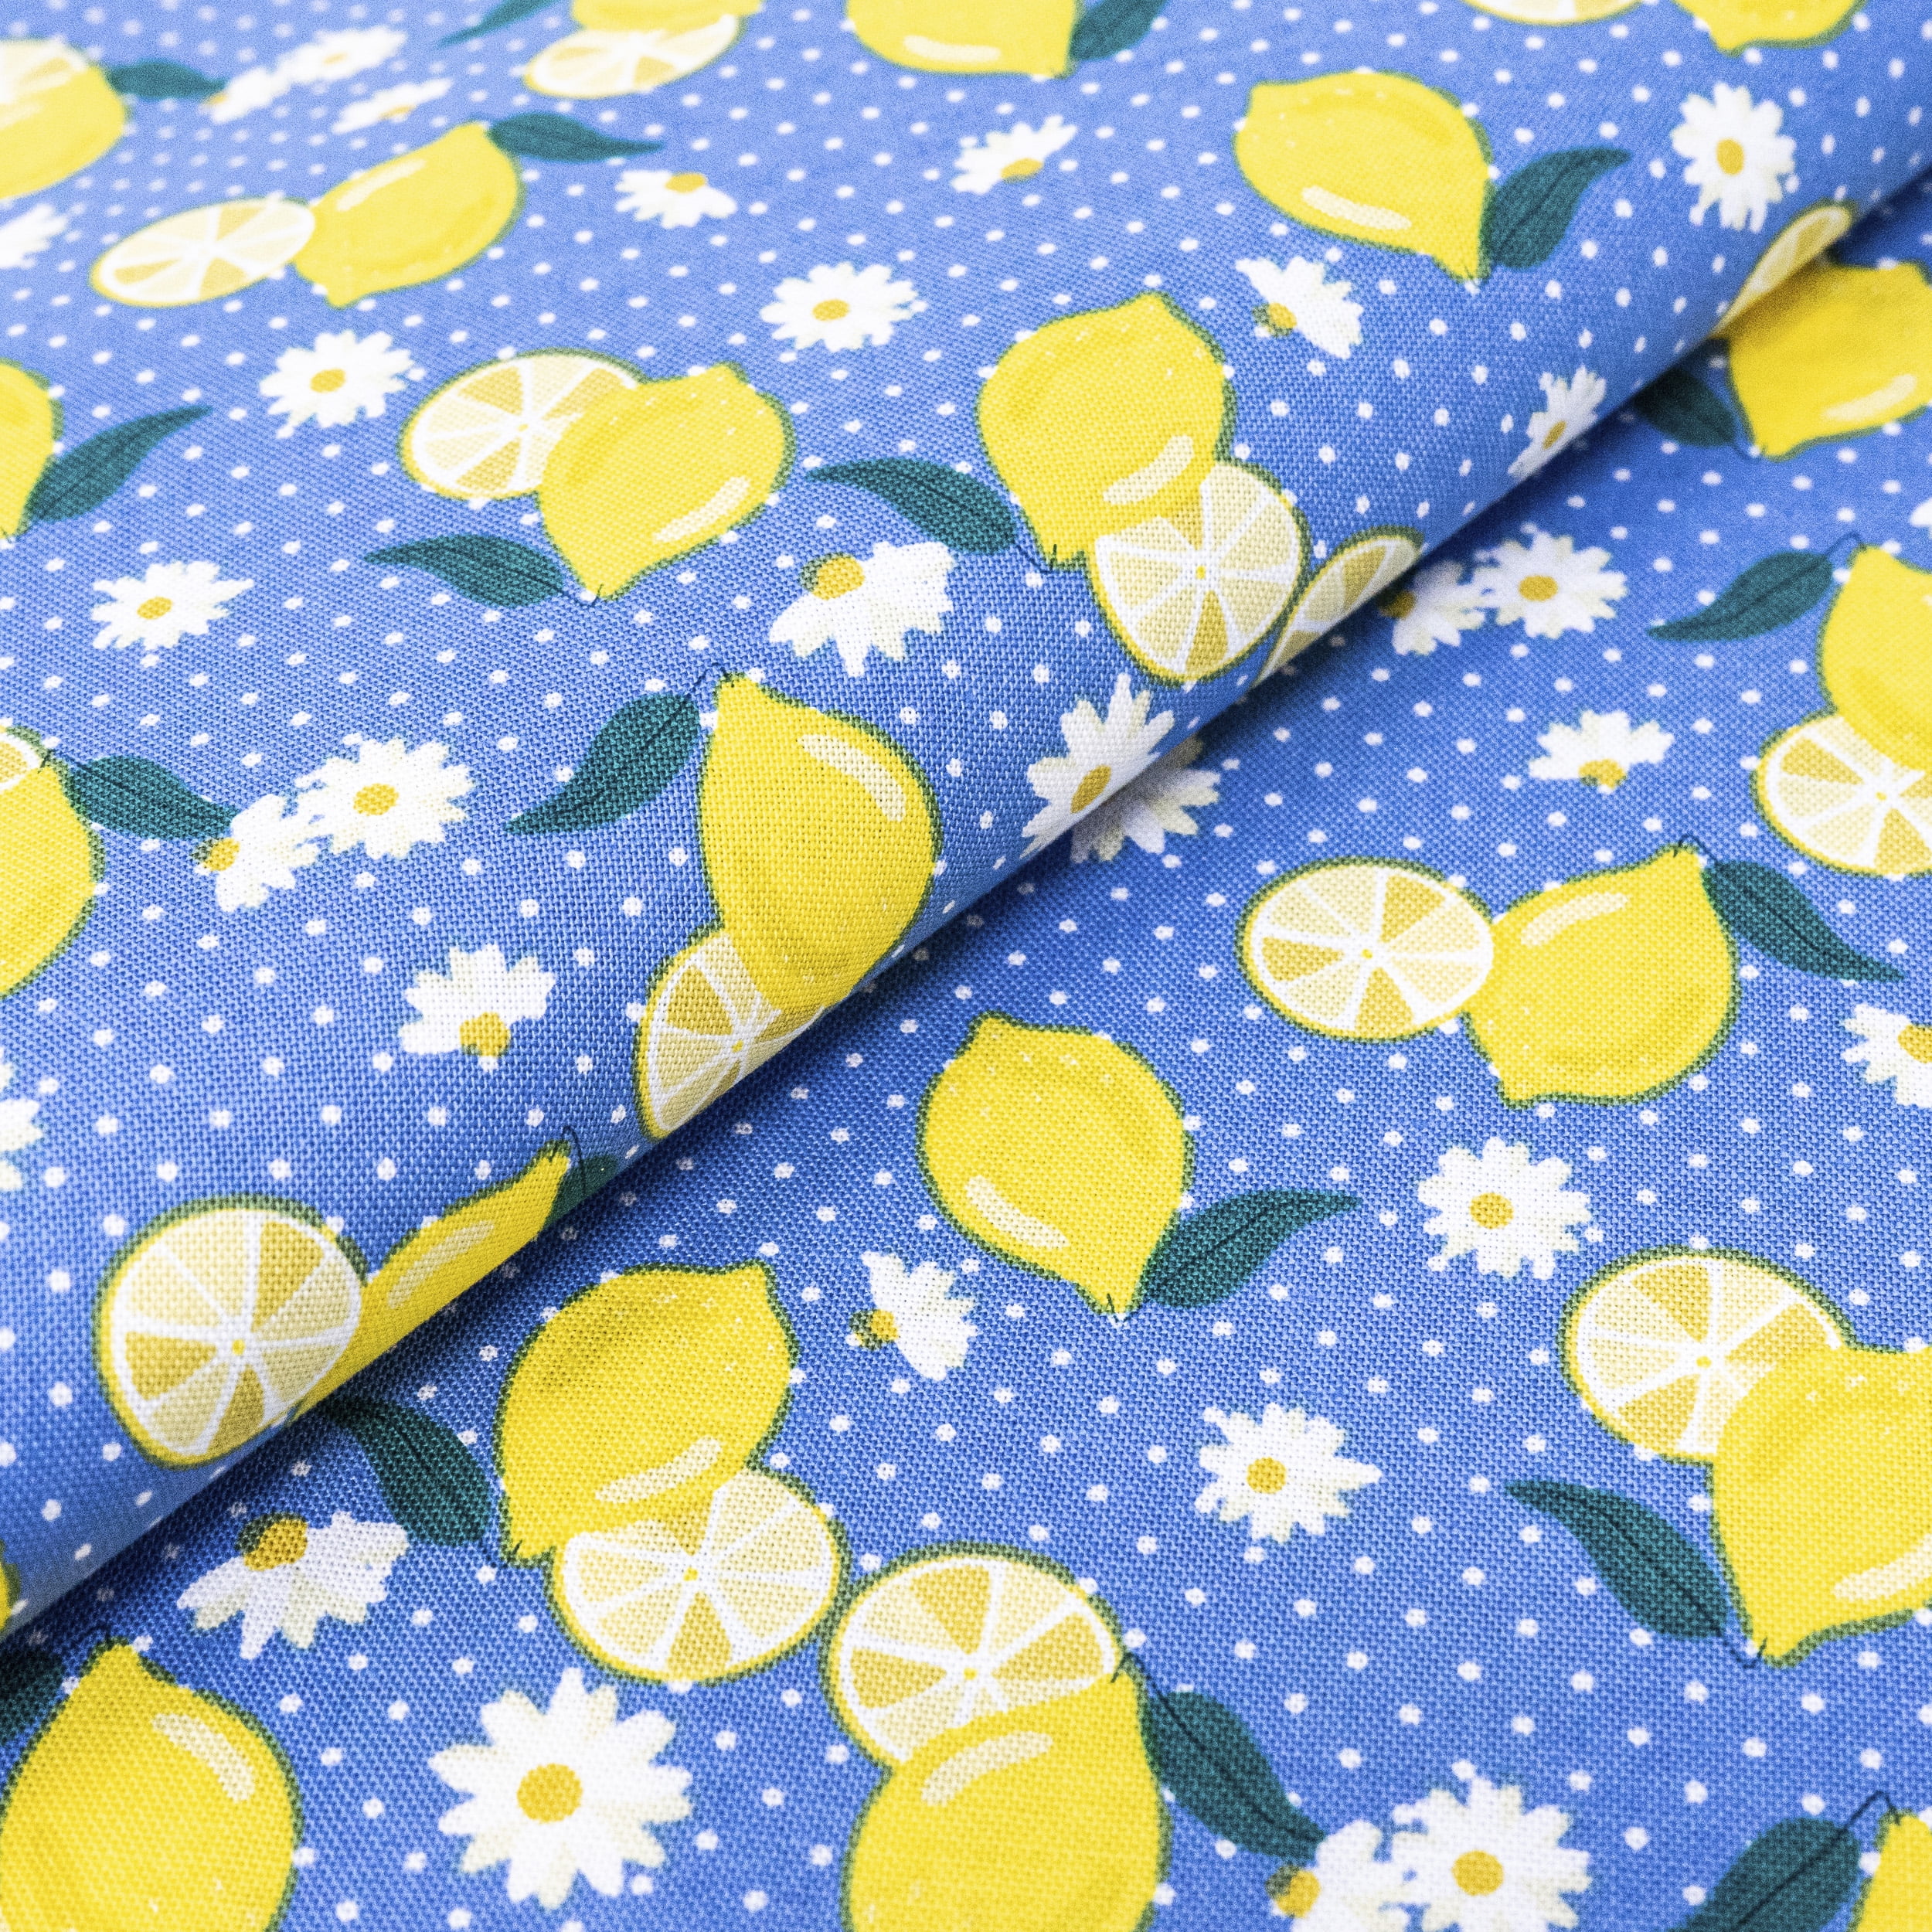 Adorable measuring tape print in 100% cotton made by Fabric Traditions.  Great for quilting, crafts, sewing, home decorating and apparel. — The  Broadway Silk Store